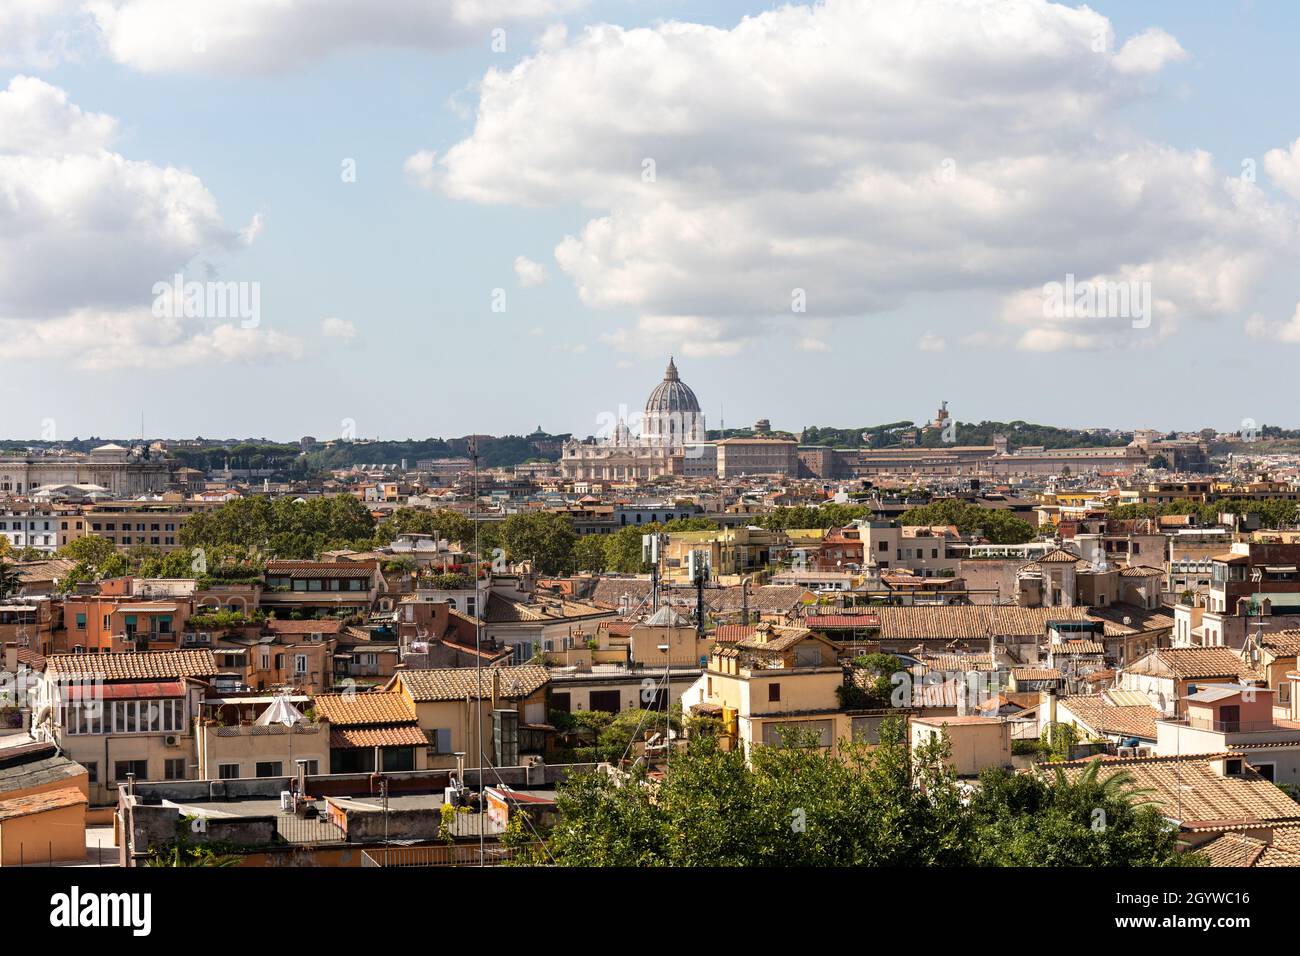 Roman roofs and dome of St. Peter's Basilica in distance, viewed from Pincian Hill in Rome, Italy Stock Photo